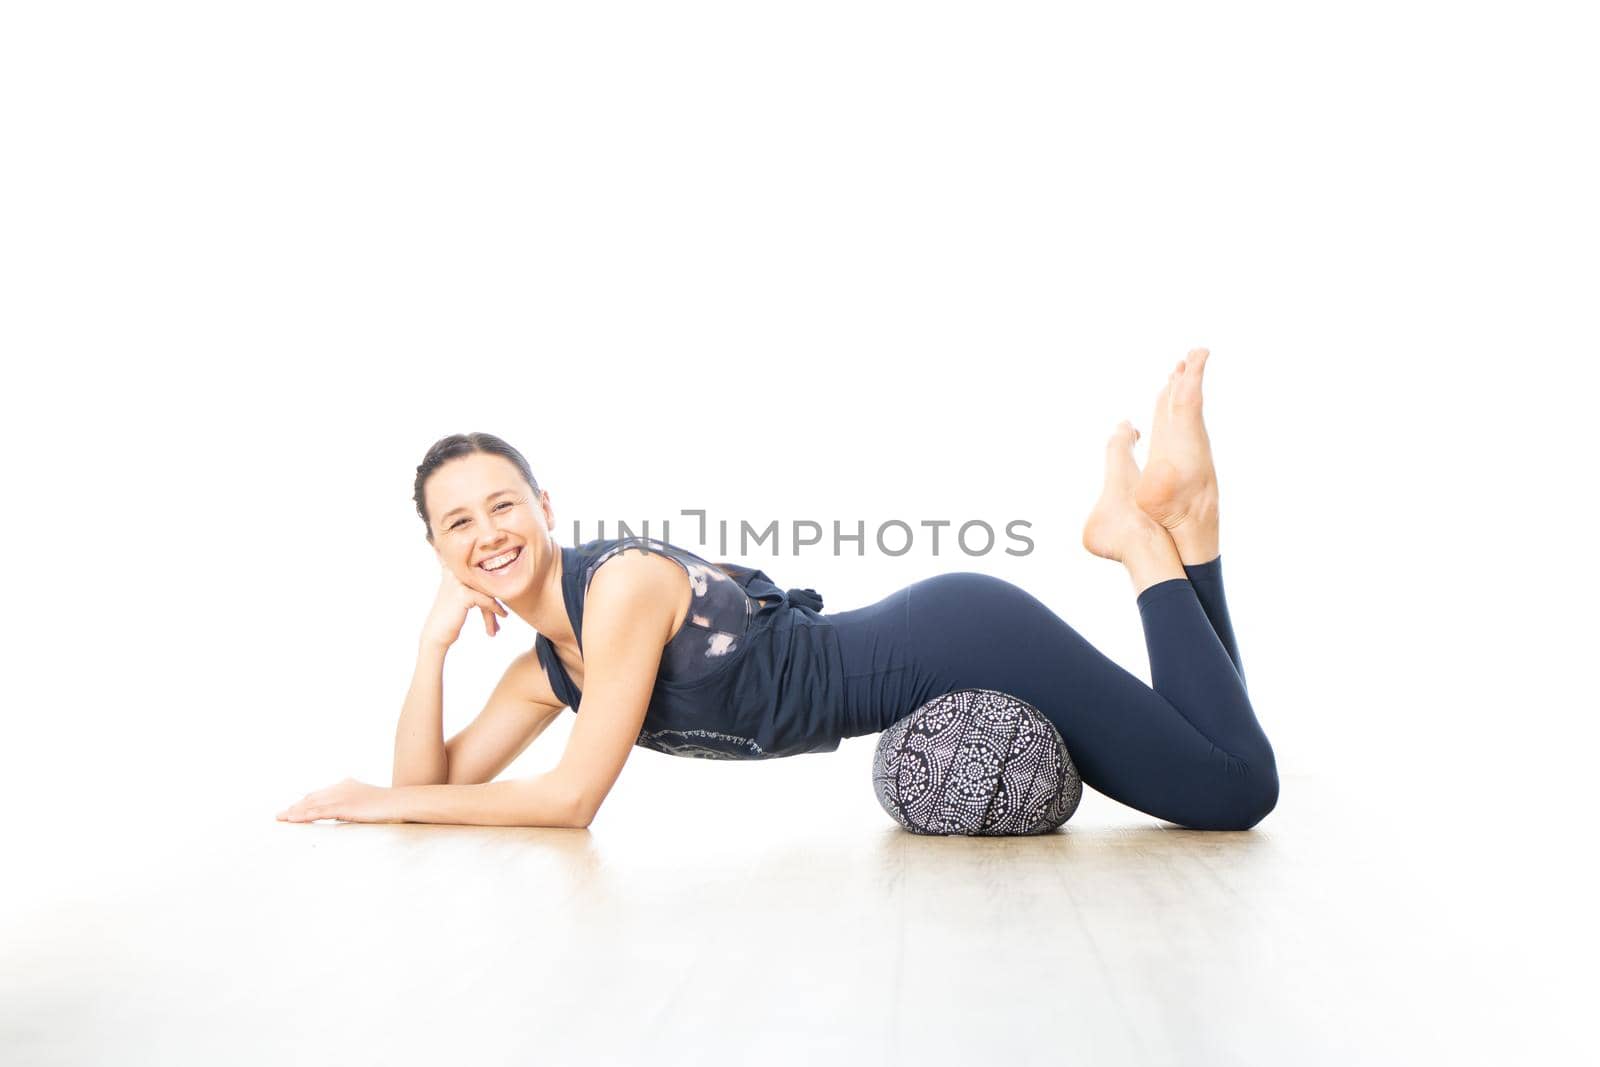 Restorative yoga with a bolster. Young sporty female yoga instructor in bright white yoga studio, lying on bolster cushion, stretching, smilling, showing love and passion for restorative yoga by kasto